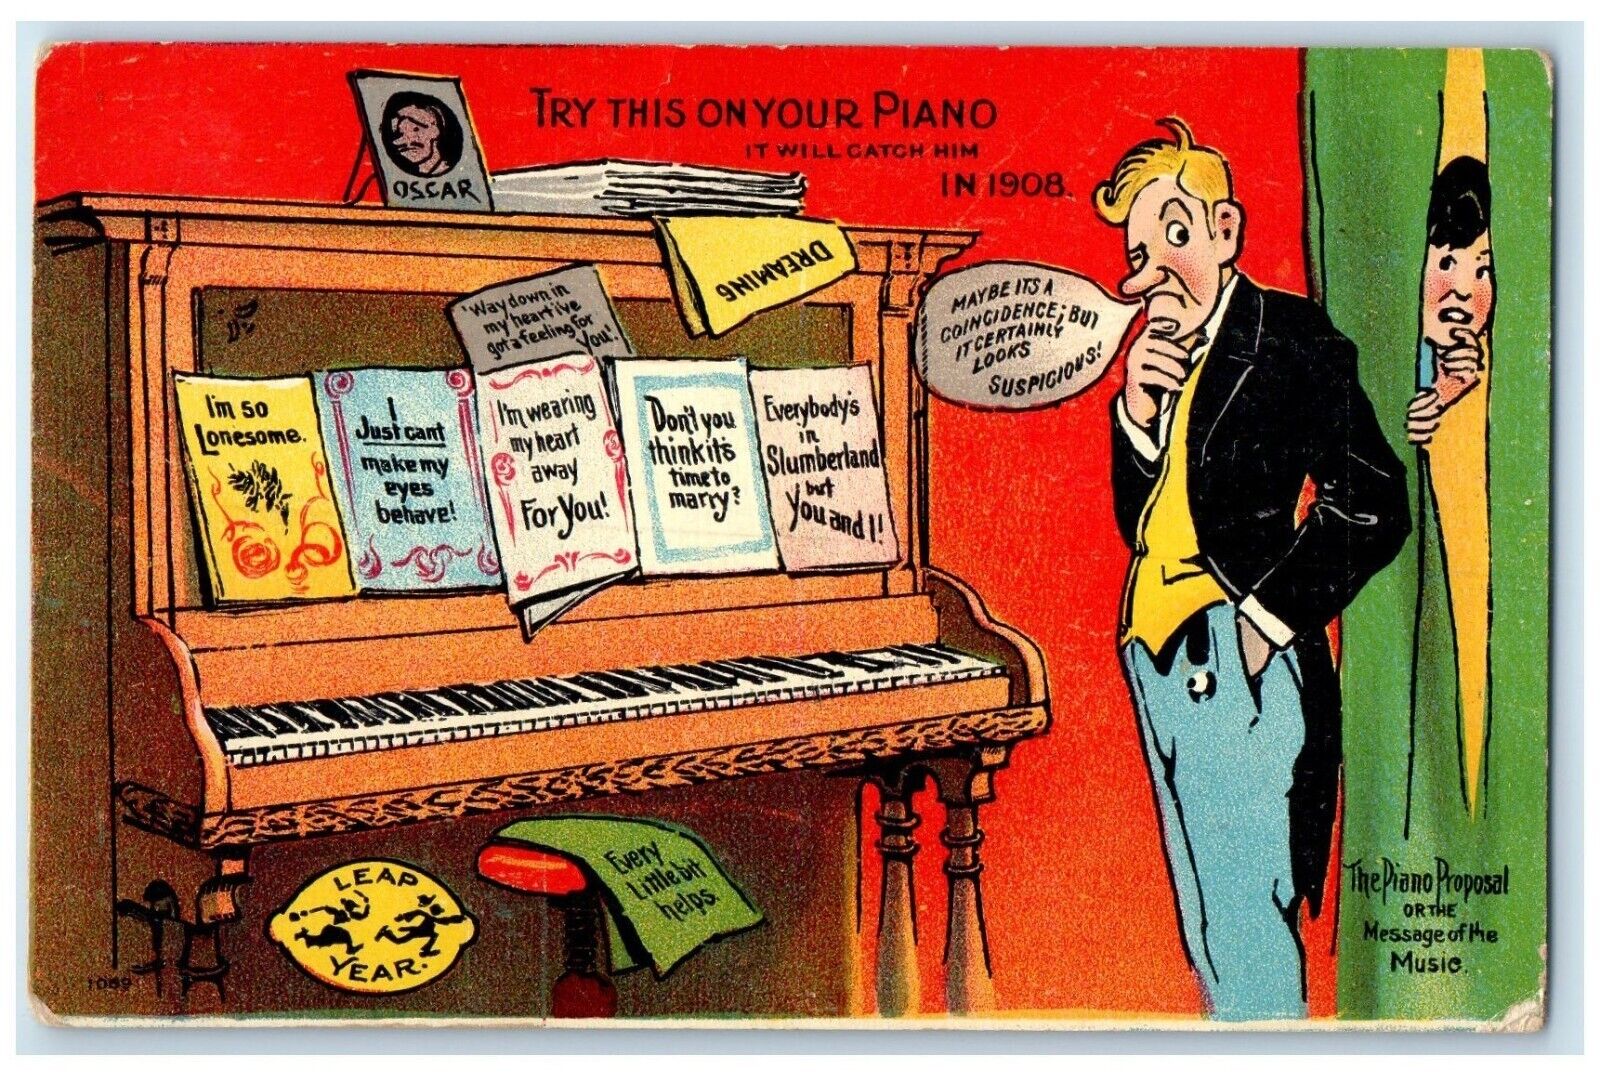 1908 Leap Year Man Piano Rubber Havana Illinois IL Posted Antique Postcard